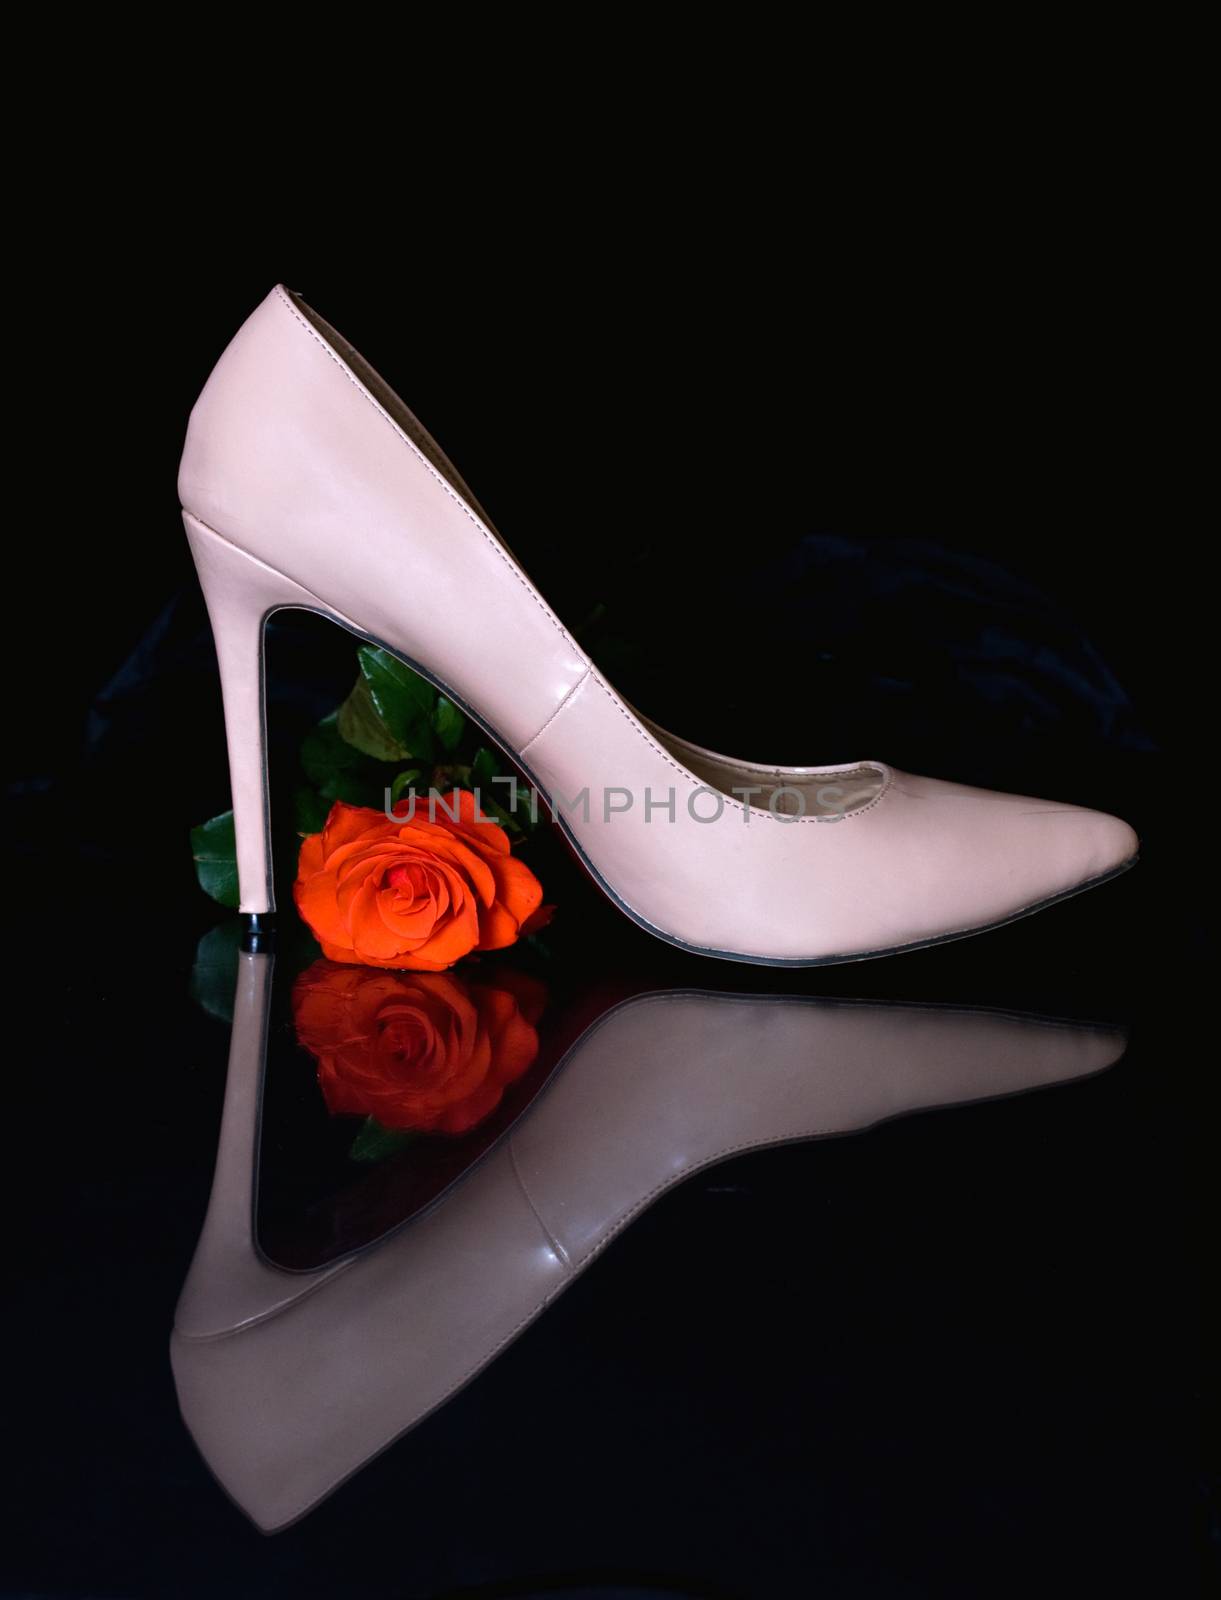 One reflected red rose and one high heeled sexy shoes.